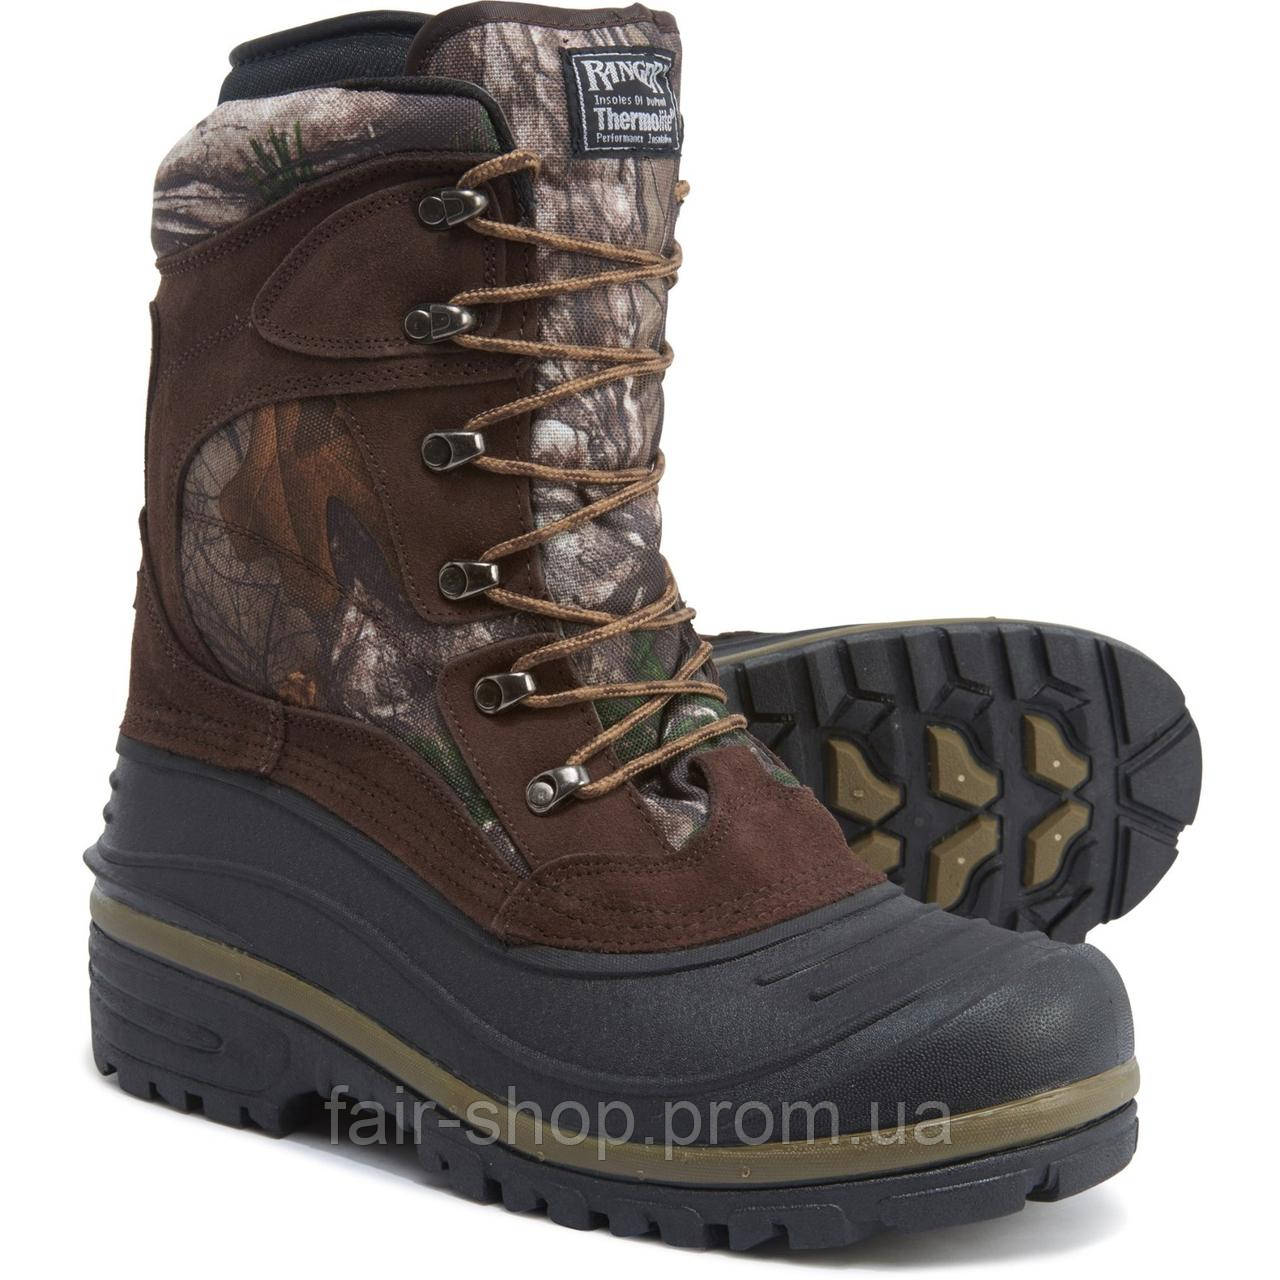 ranger insulated boots